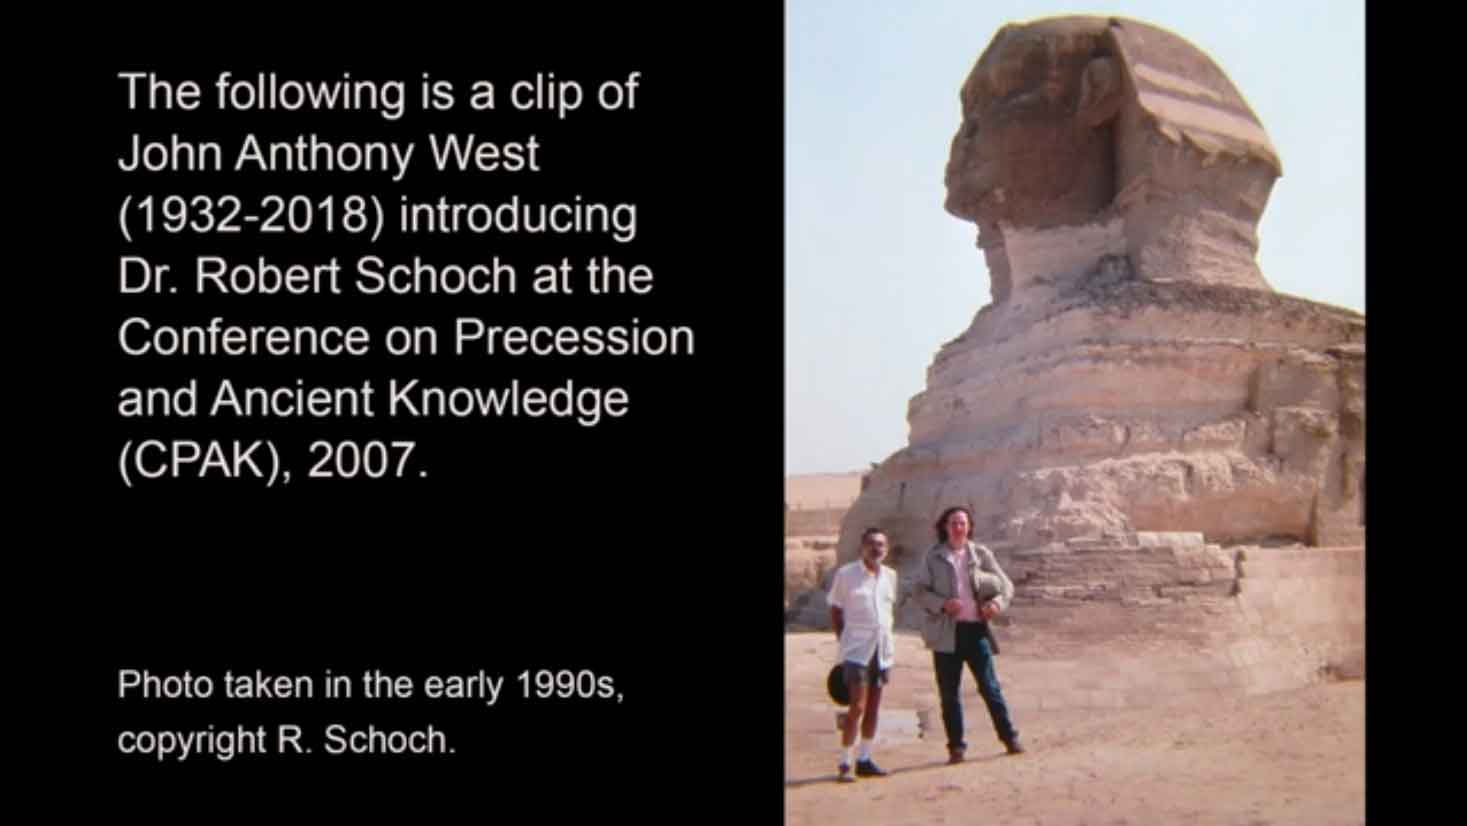 Thumbnail image for a short and humorous YouTube video of John Anthony West introducing 
							Robert Schoch at the Conference on Precession and Ancient Knowledge in 2007.